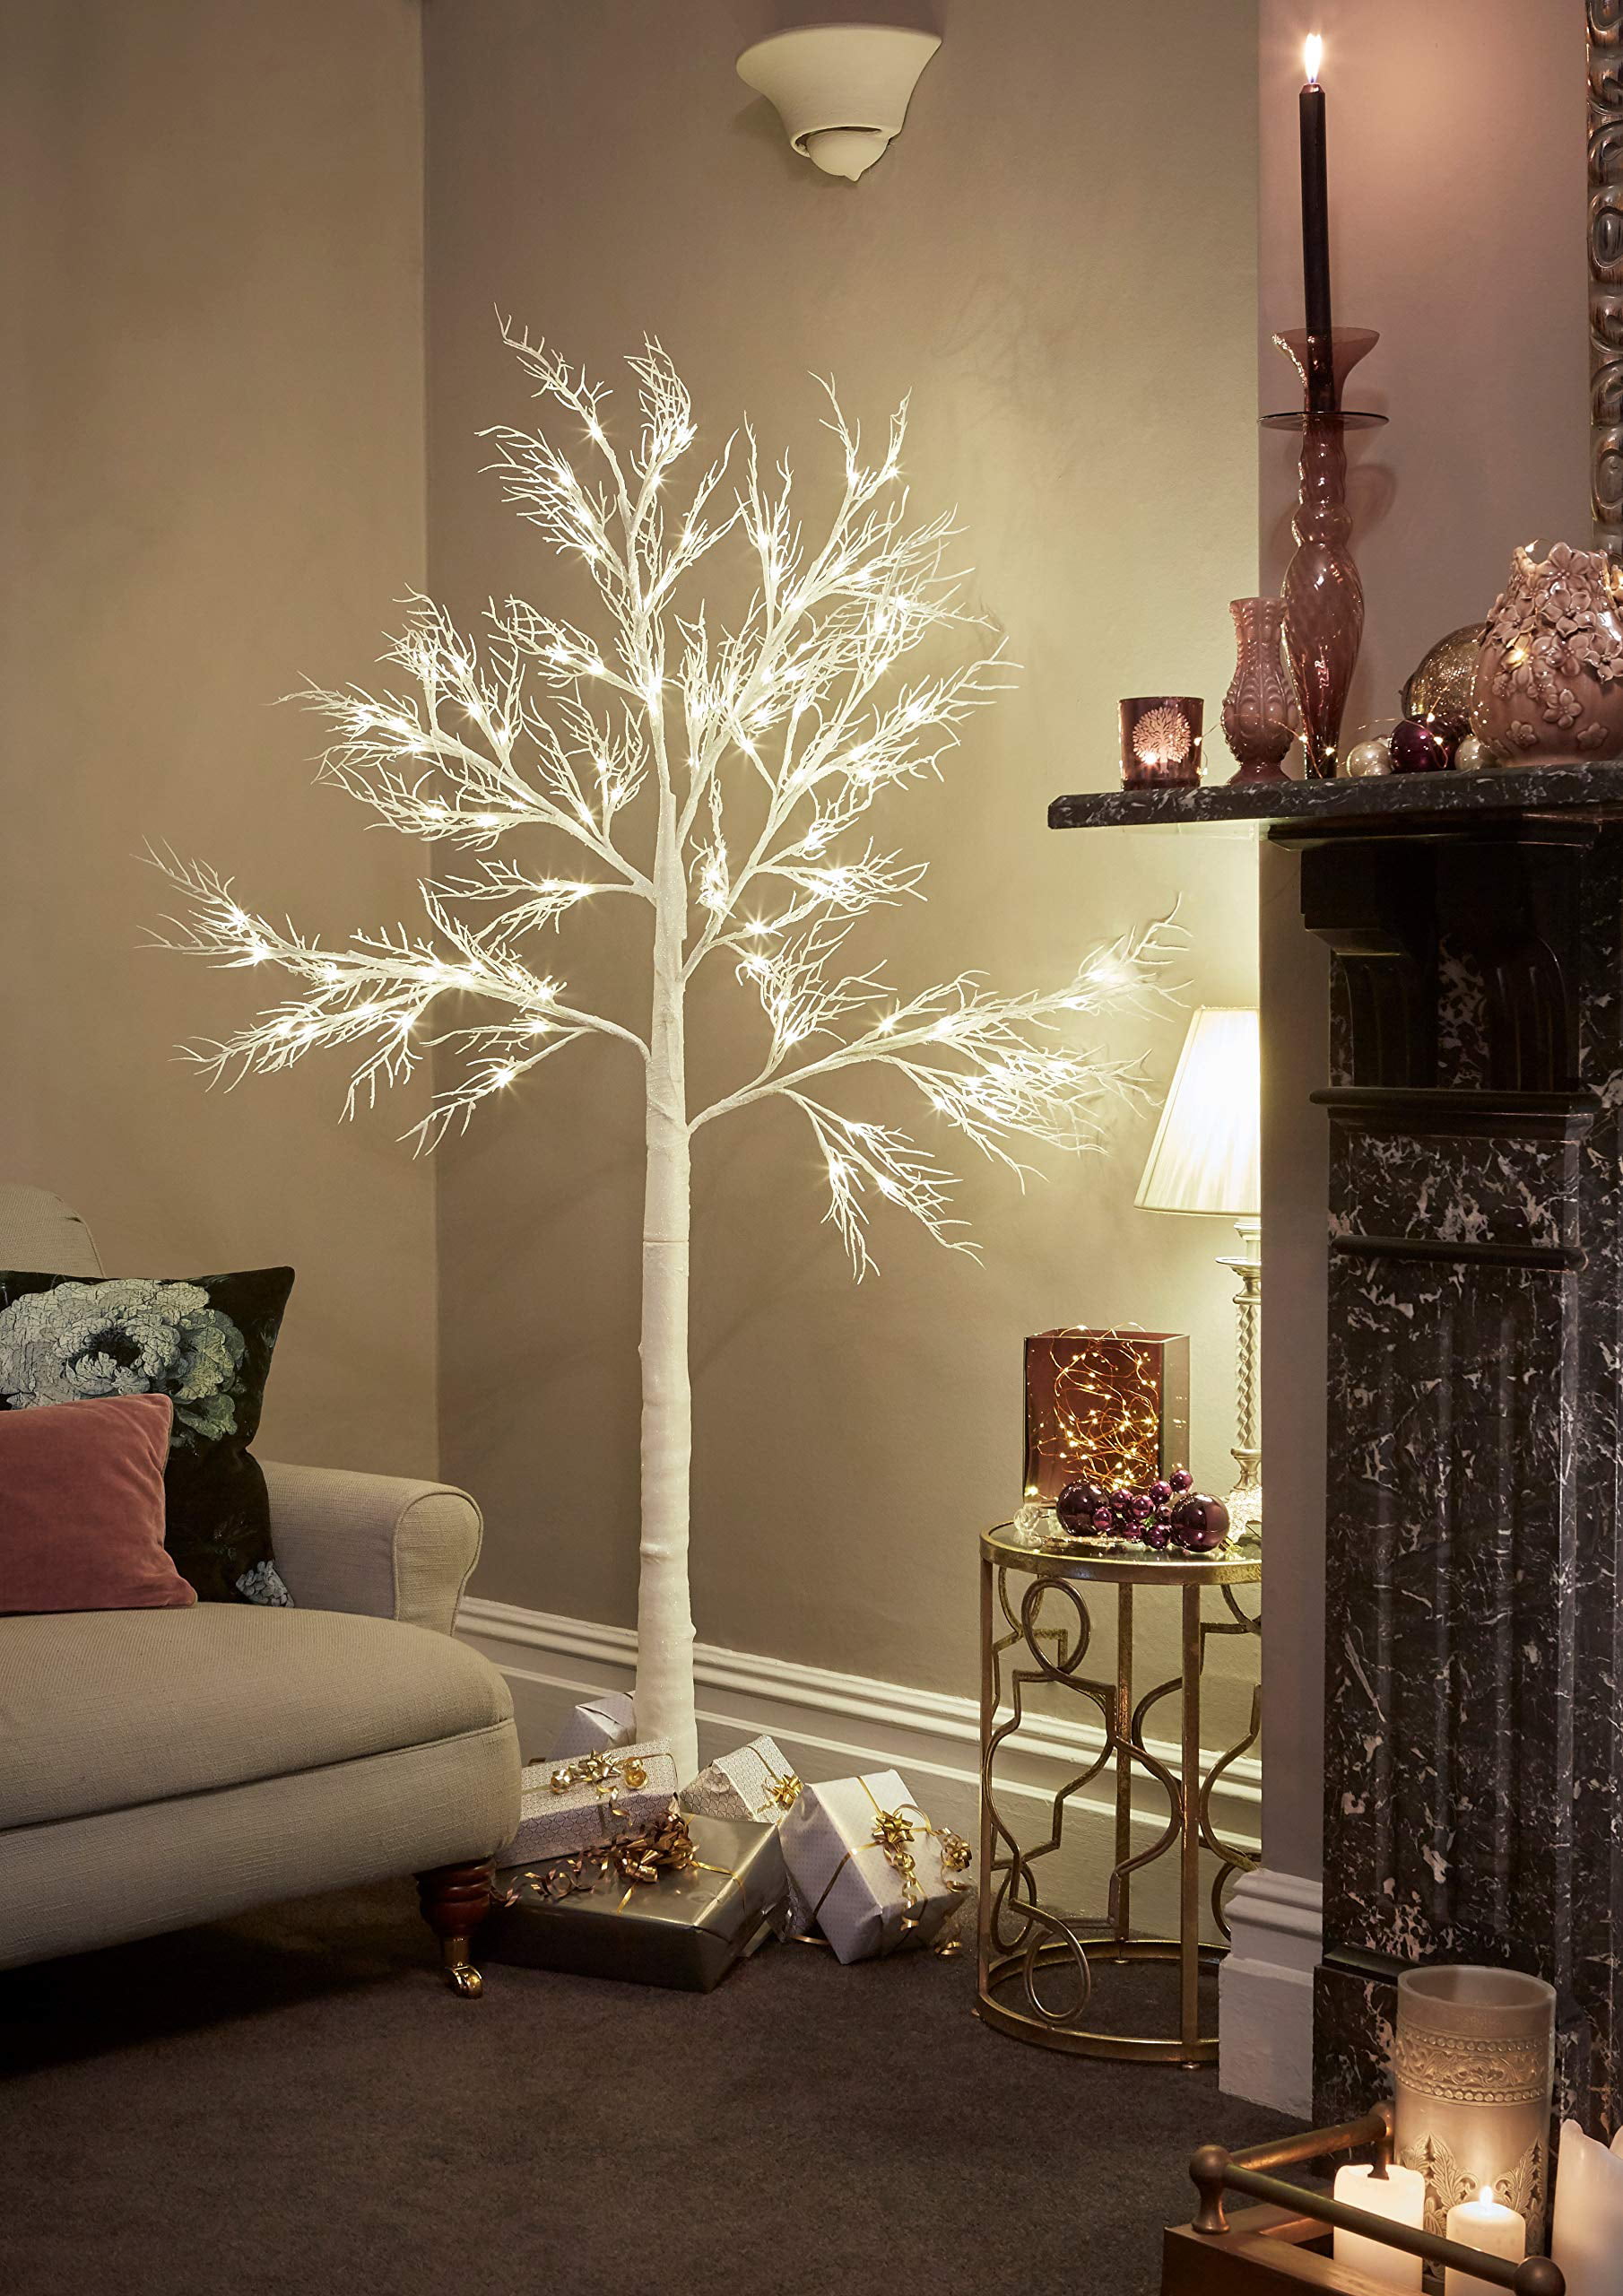 JayMark Products 7ft Christmas Deadwood White Twig Tree Pre Lit 120 LED with Warm White Lights